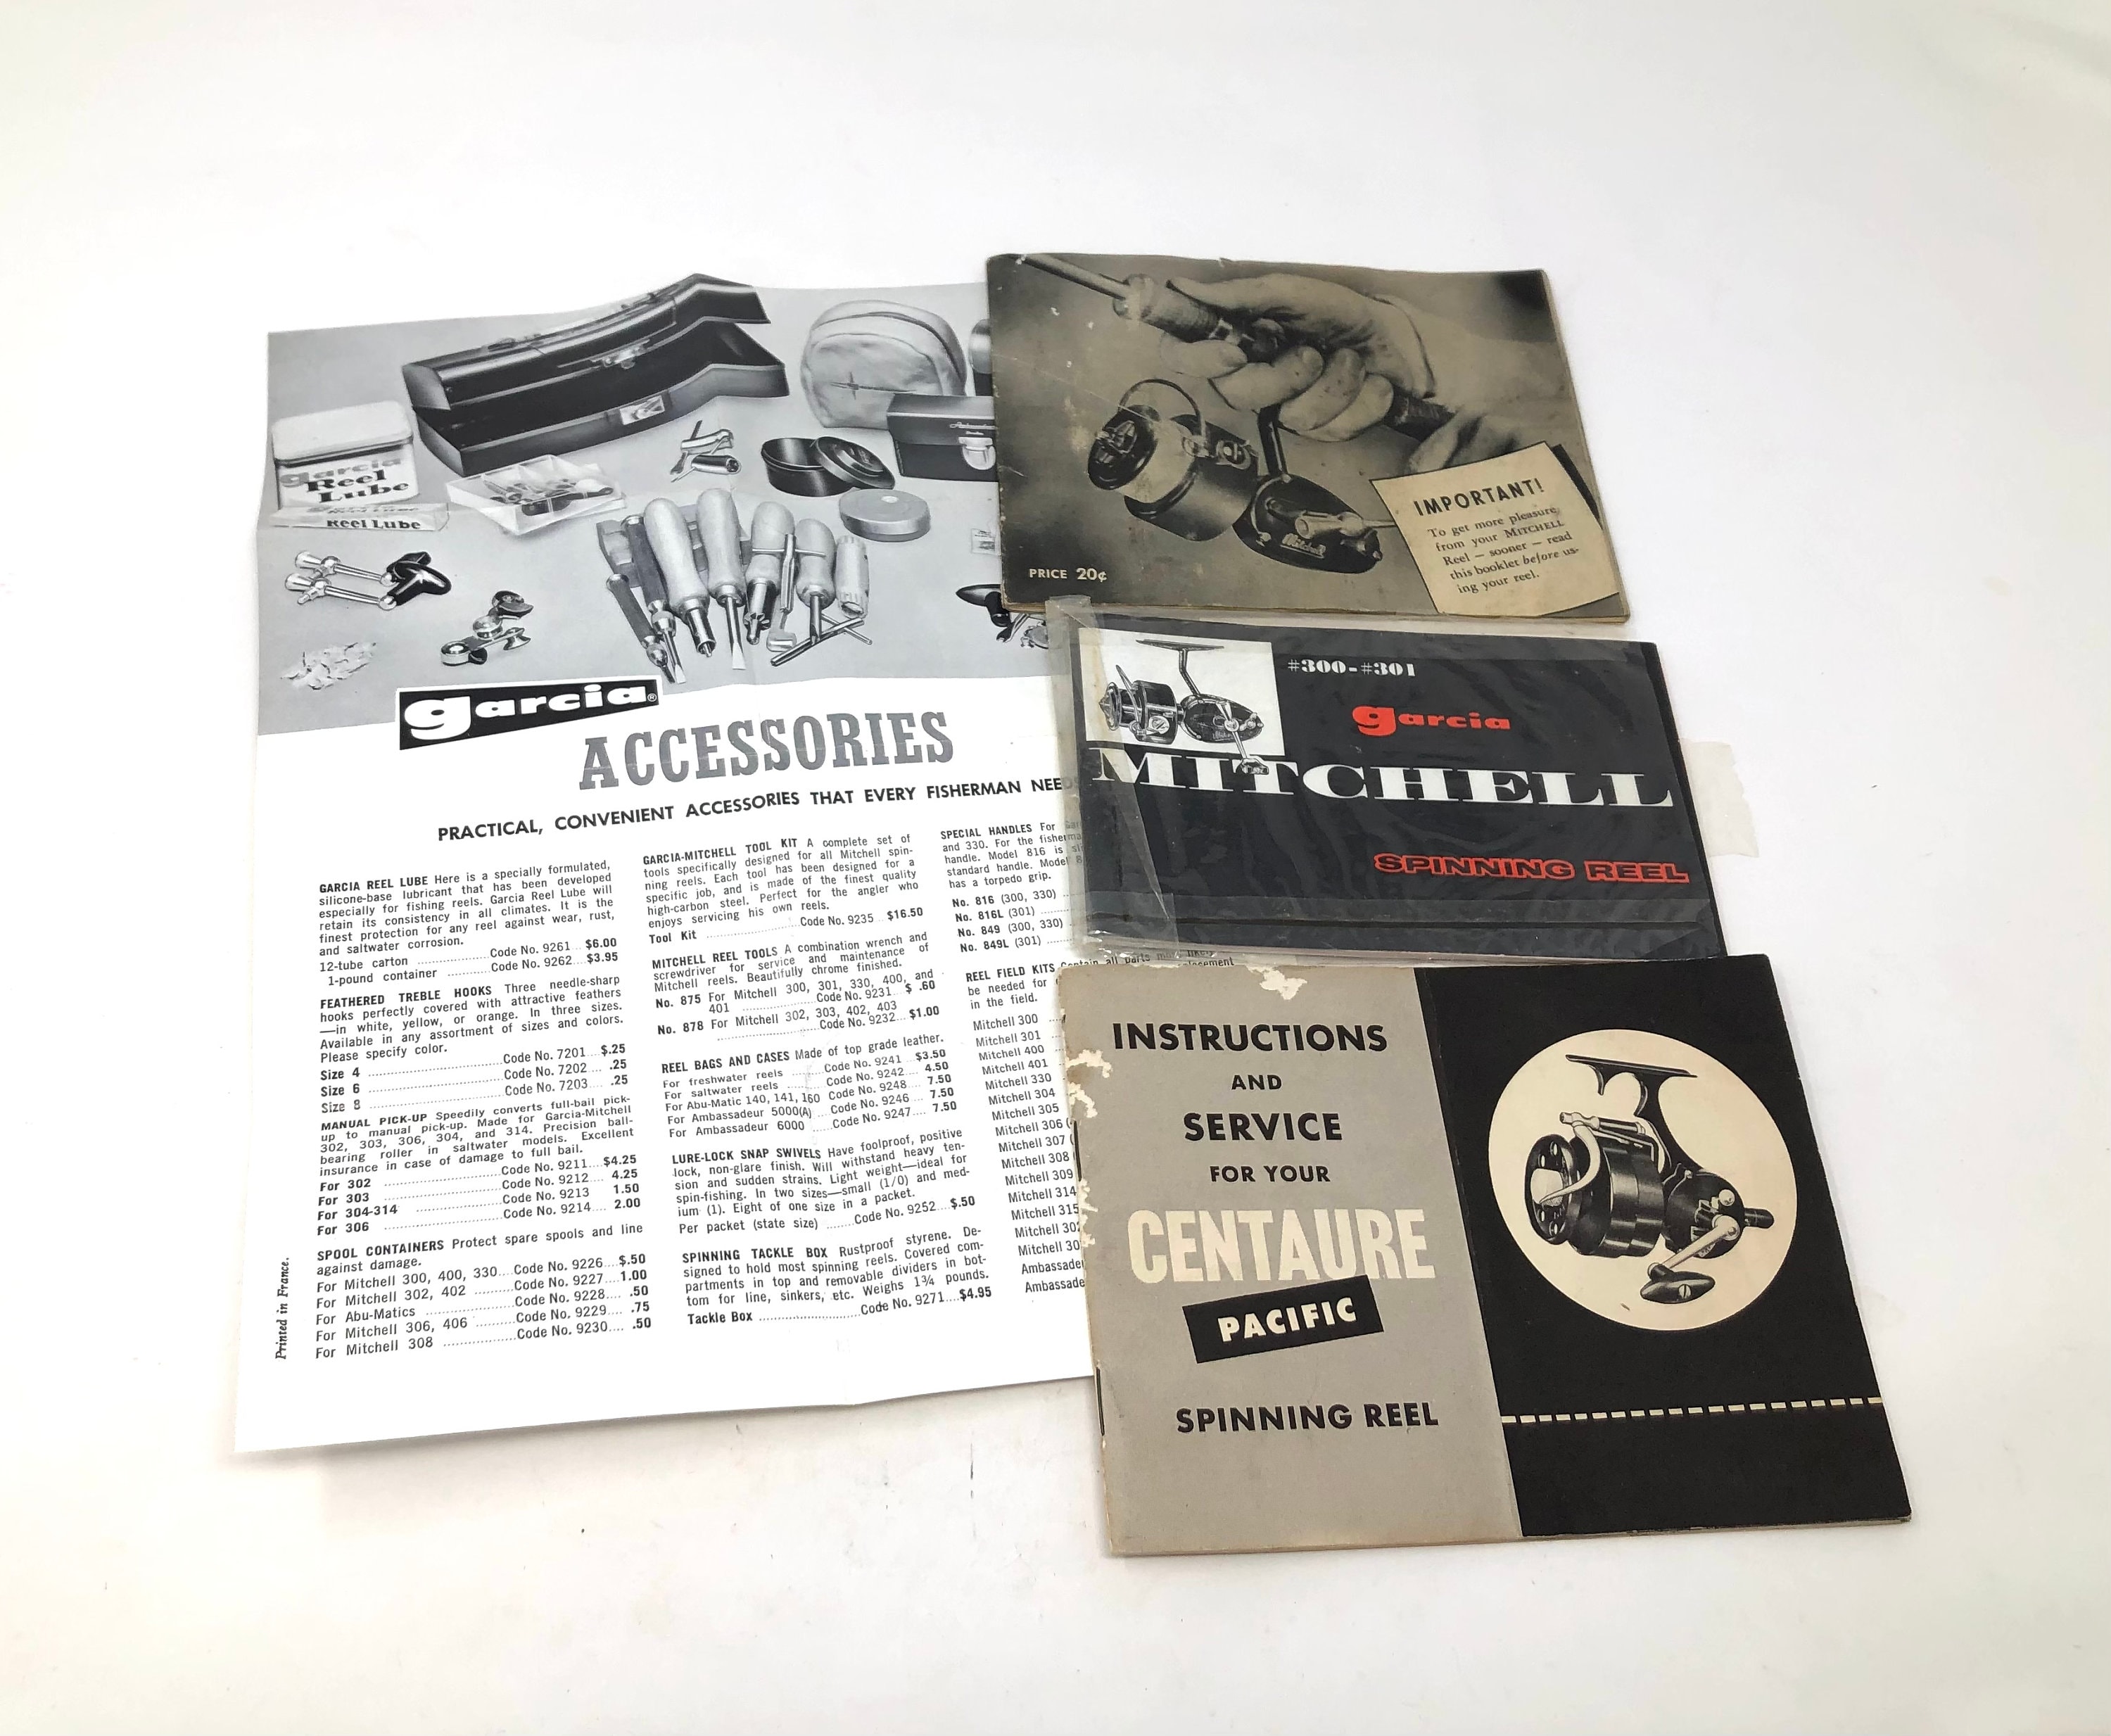 3 Vintage Spinning Reel Instruction Service Manuals / 2 Antique Garcia  Mitchell Spinning Reel Manuals / Vintage Centaure Pacific Reel Manual